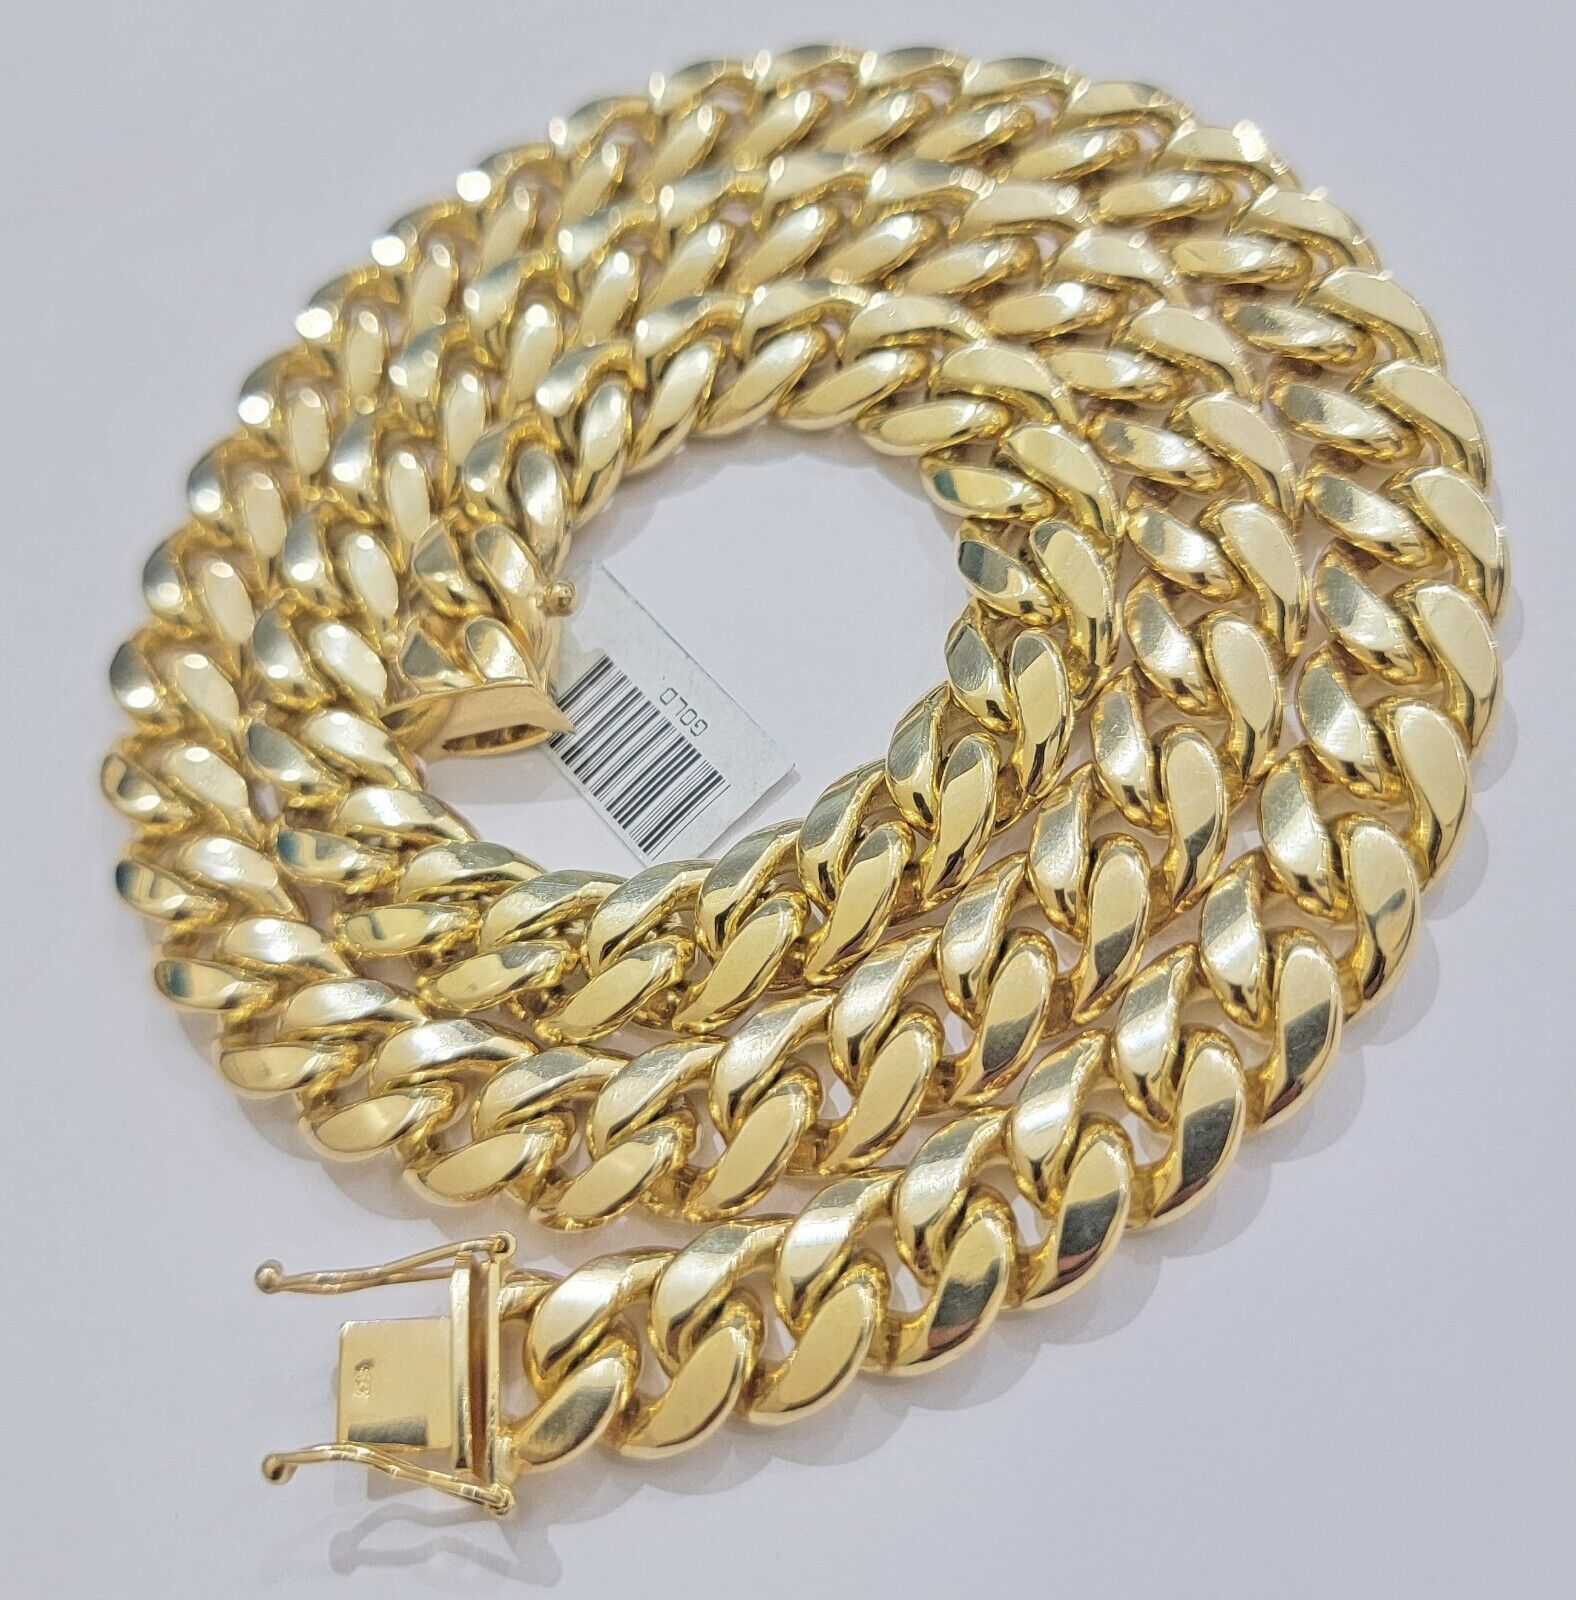 11mm Cuban Solid Link Chain Mens Necklace 10k Yellow Gold 22" Thick Heavy, SALE